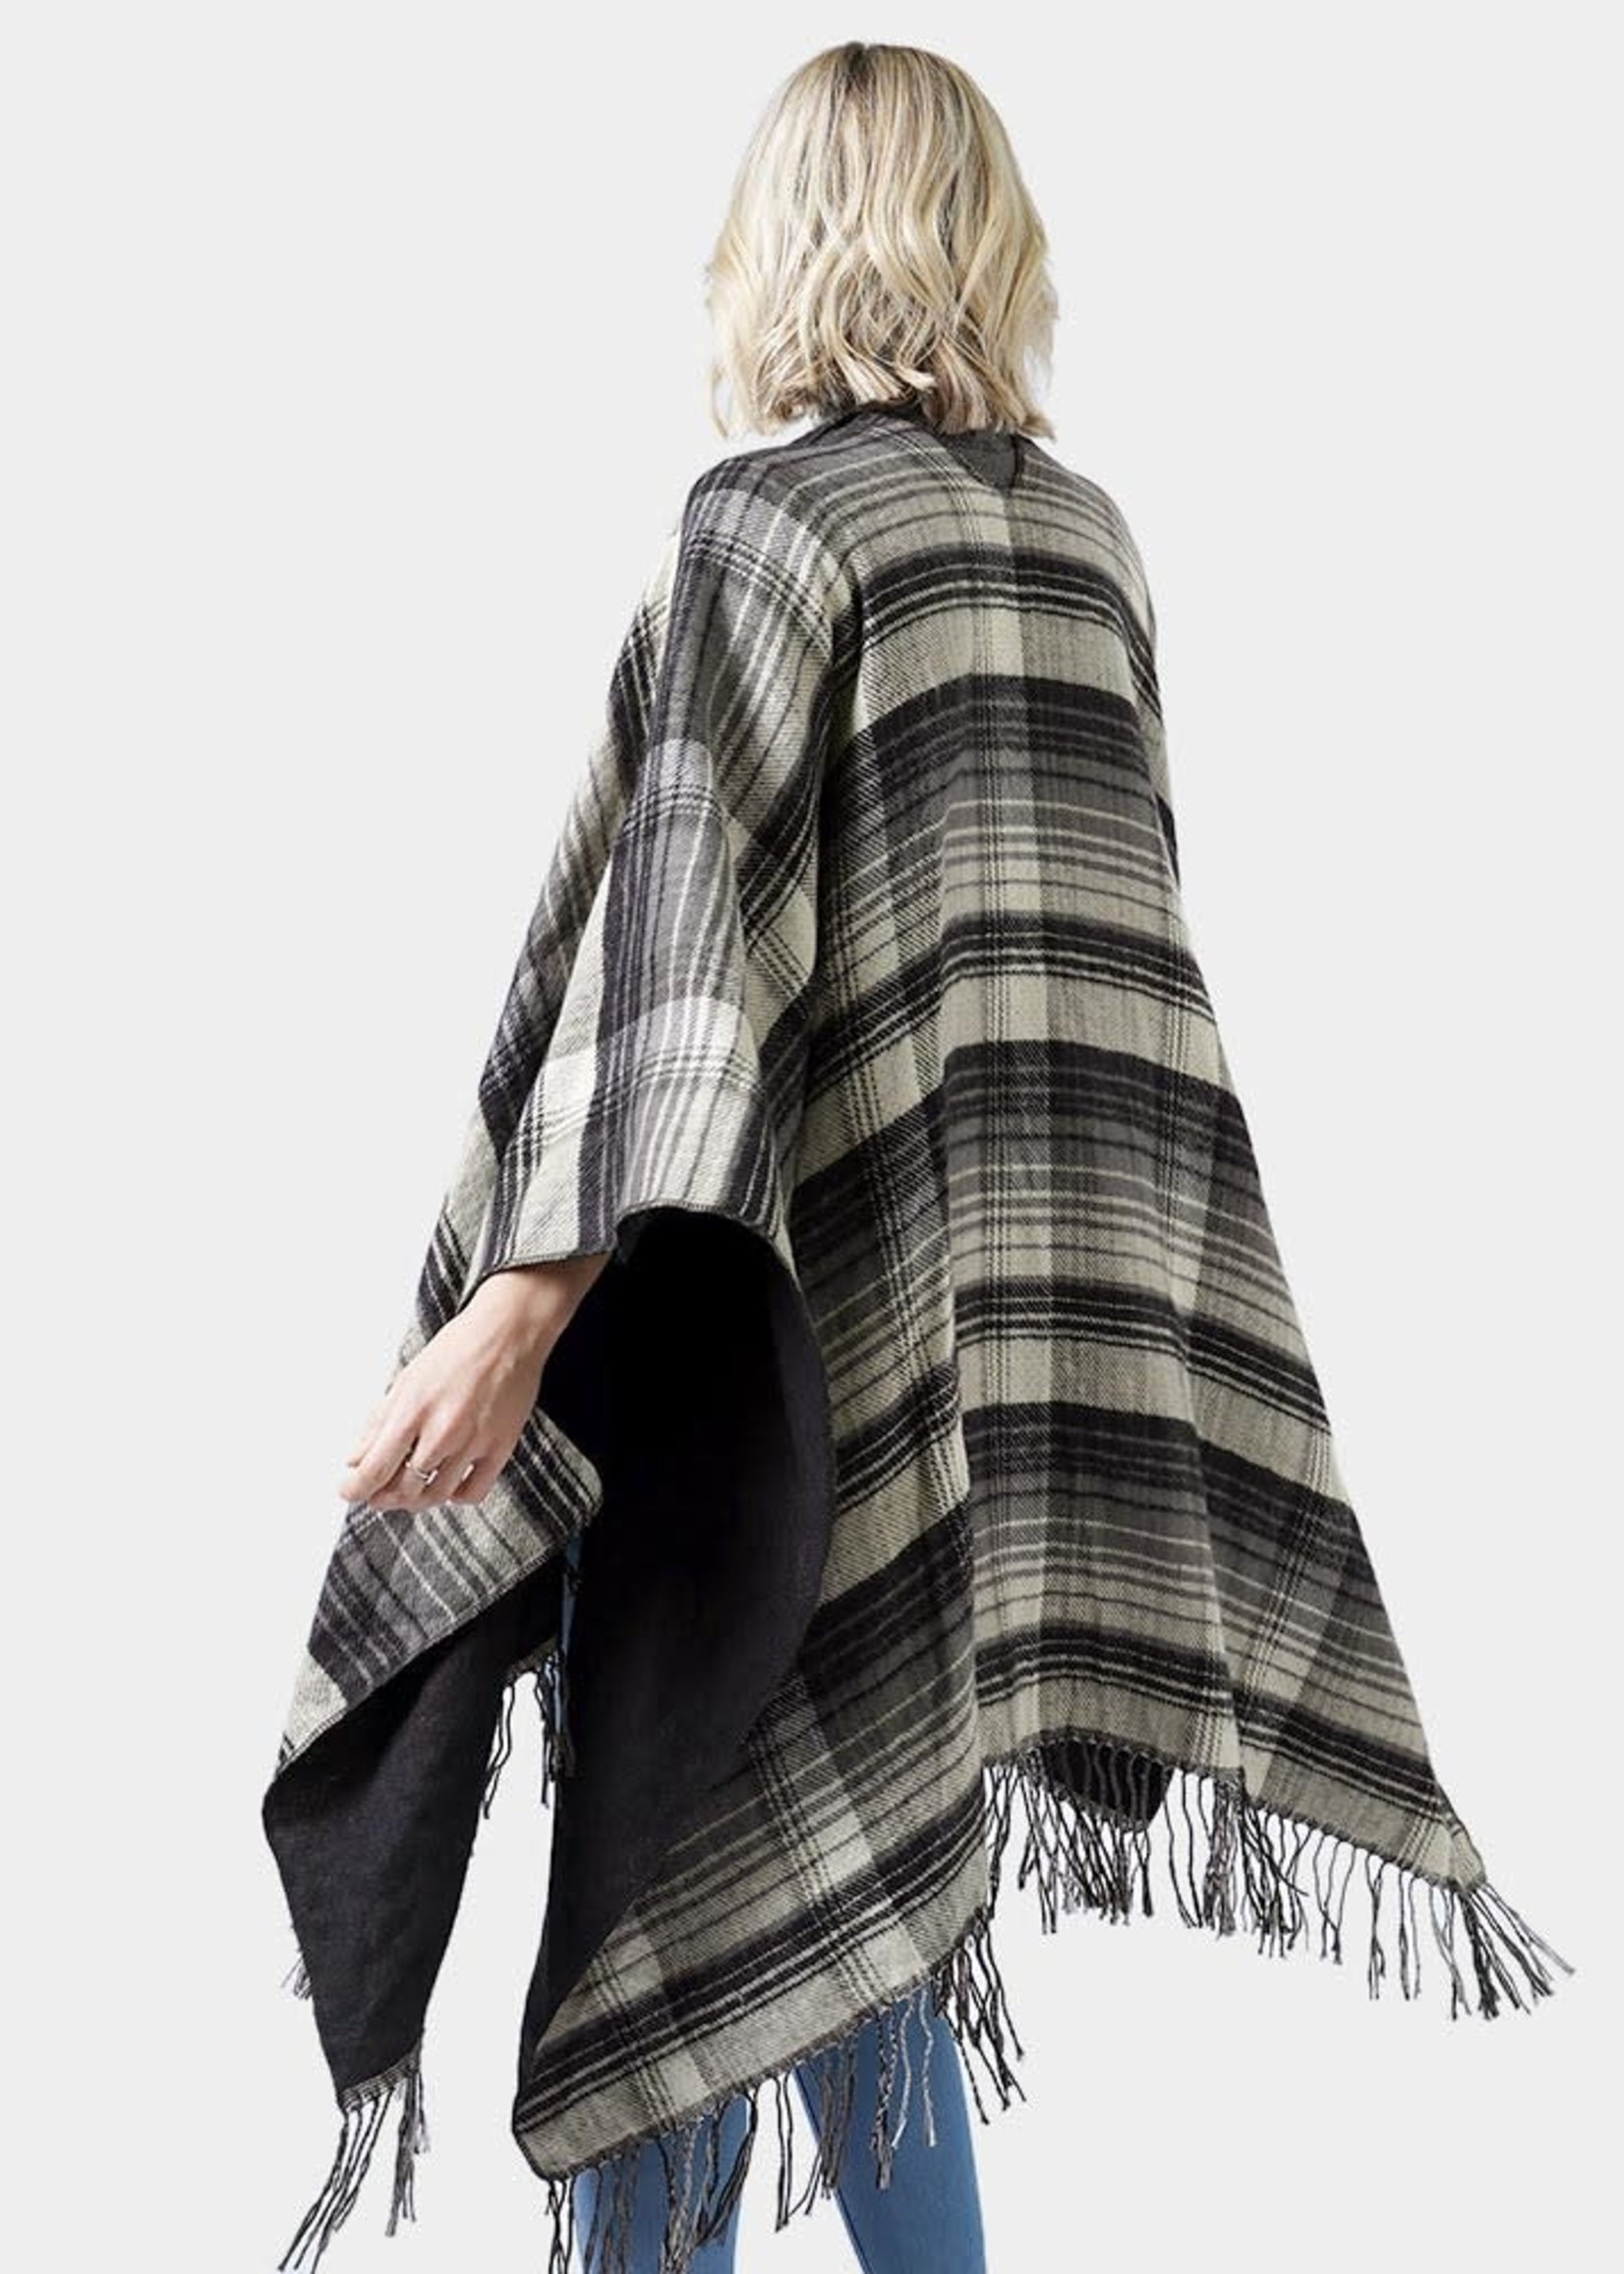 Reversible Plaid Check Patterned Tassel Cape Poncho